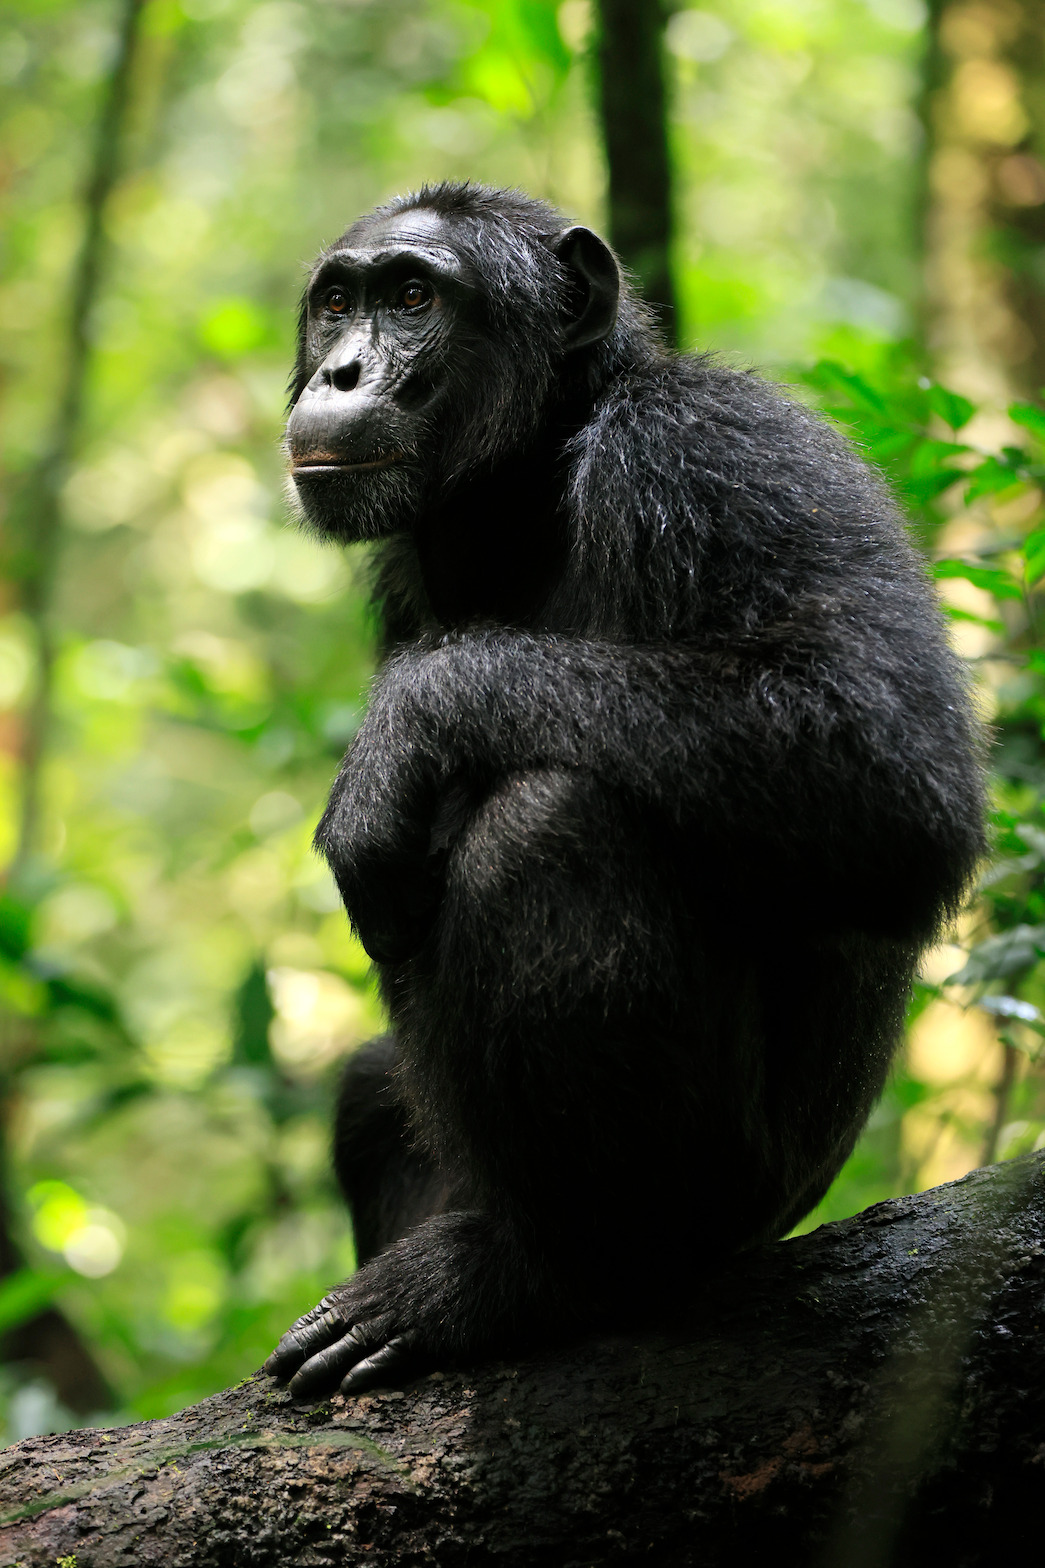 Damien, a teenage Western Ngogo chimpanzee, crouches on his rainforest perch.